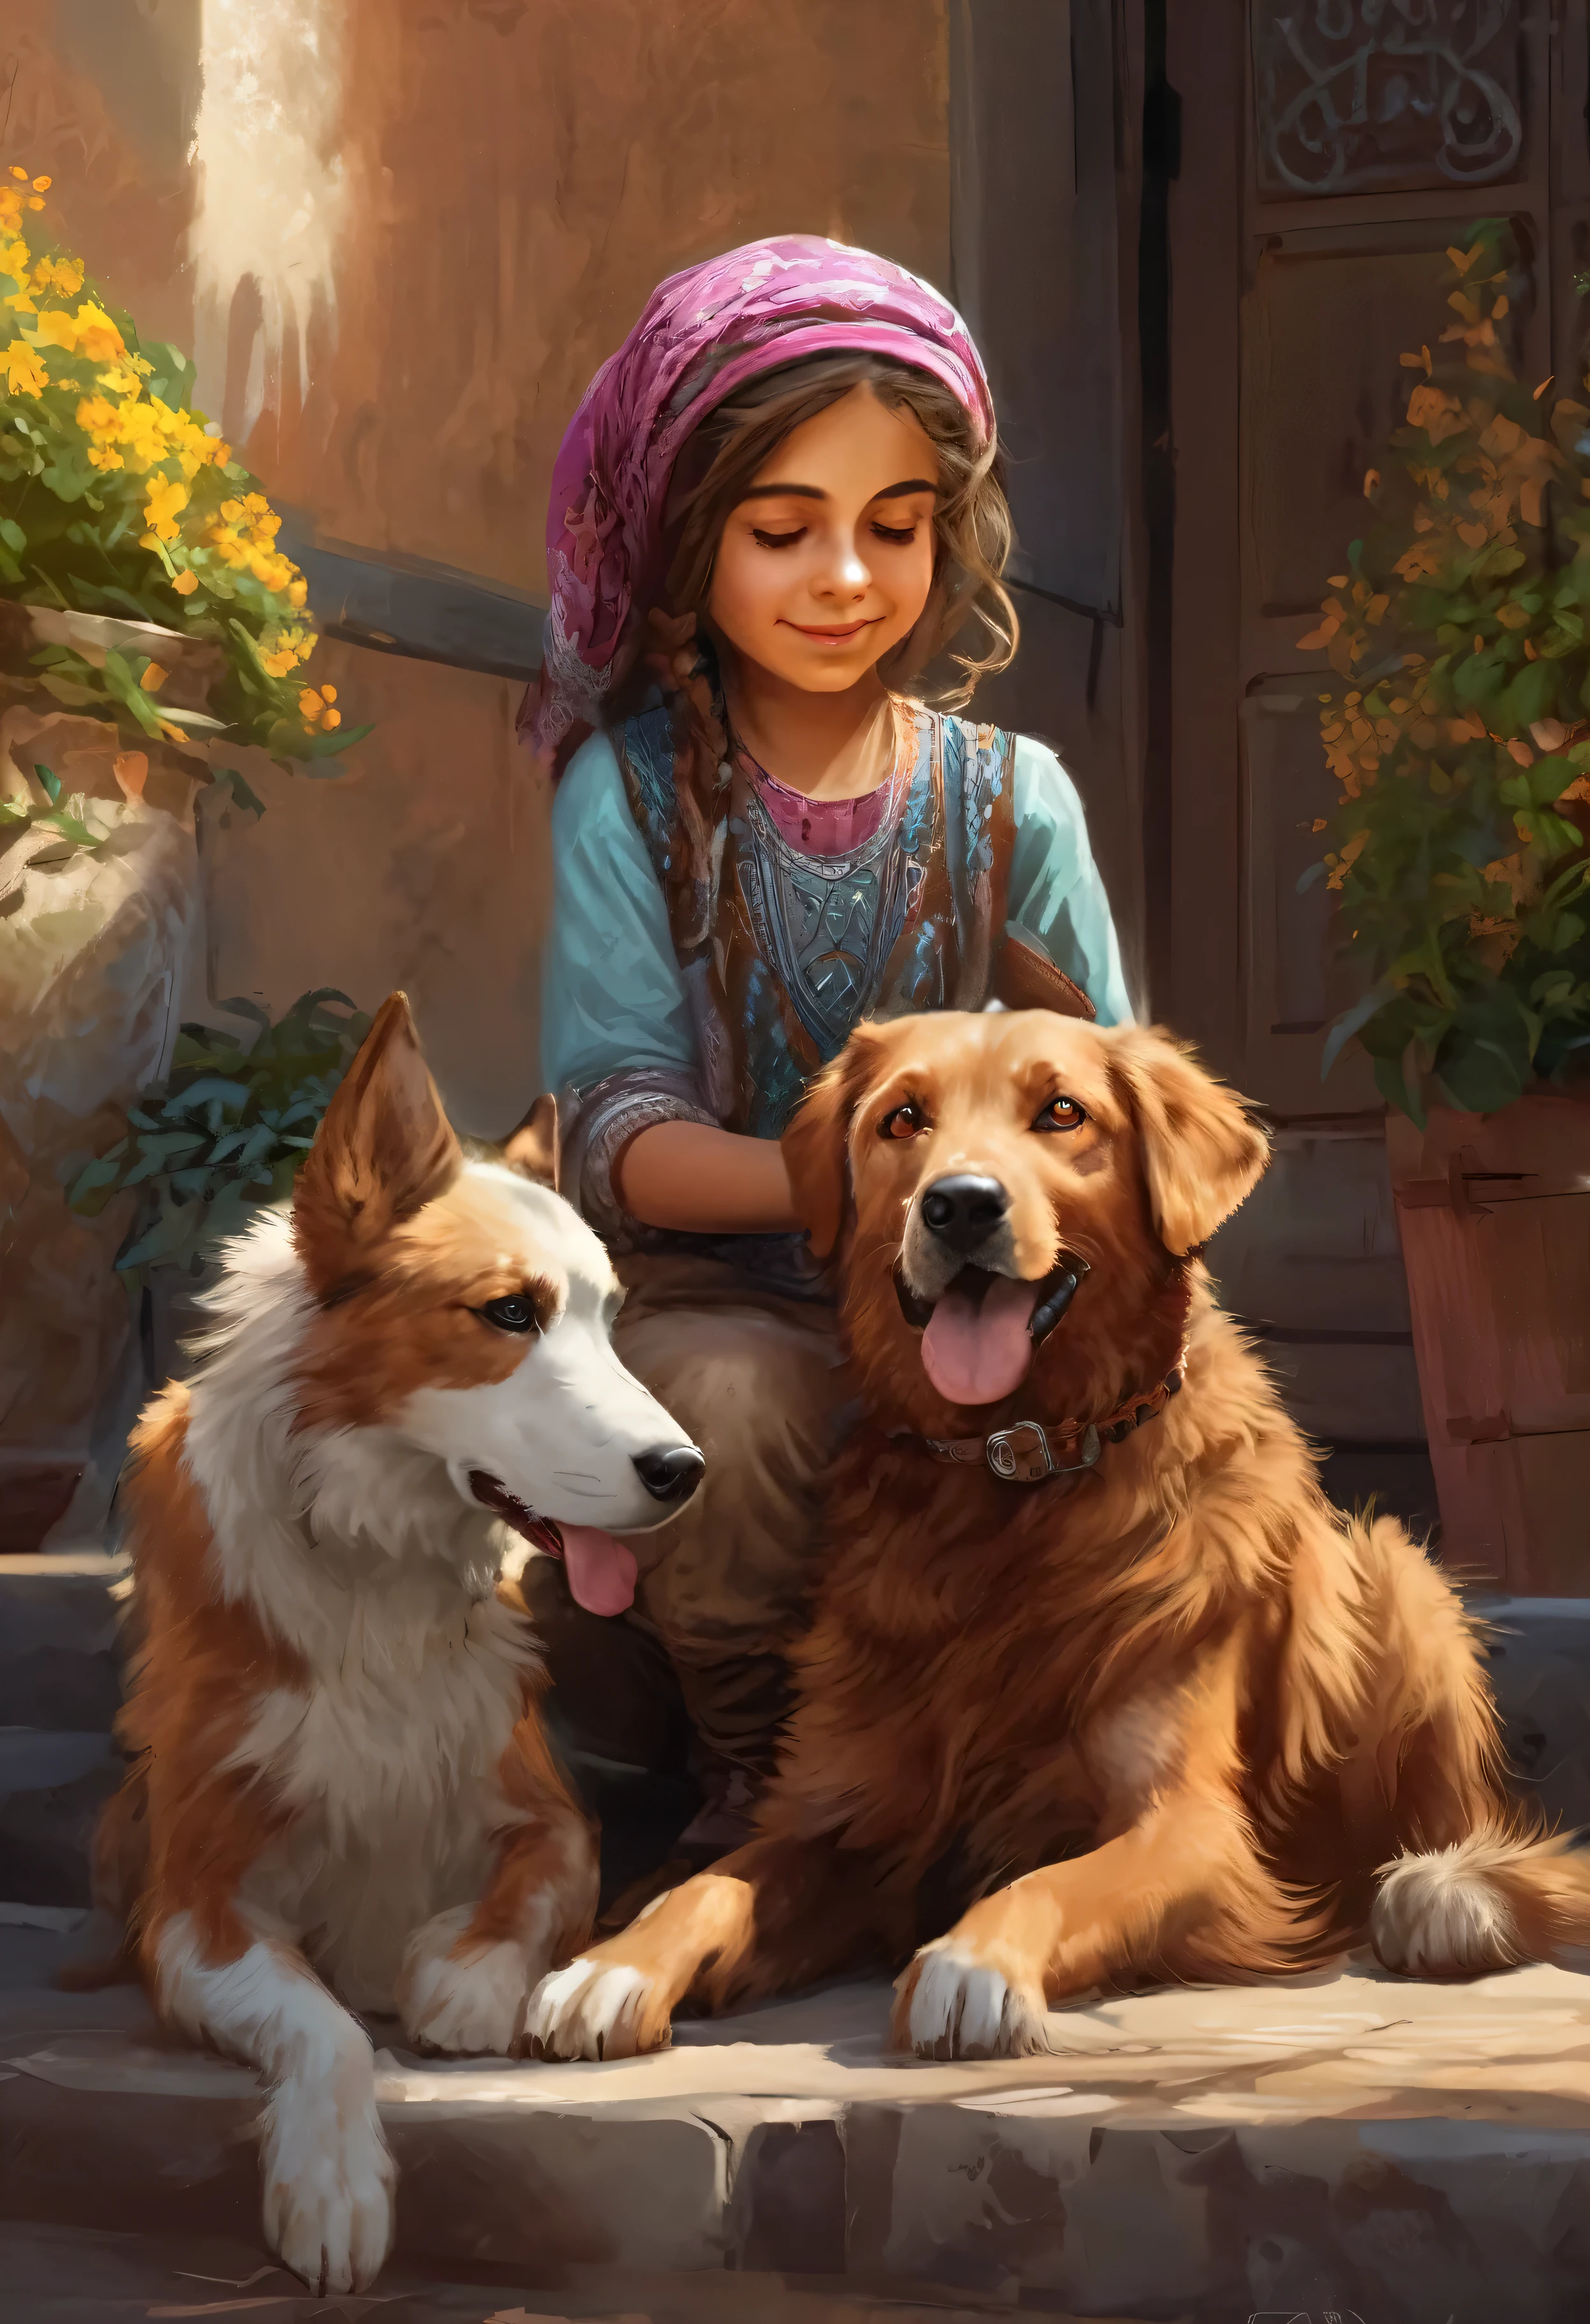 soulwarming, a little turkish girl petting a dog, friendship,  kerem beyit,  a digital painting, very cute and childlike, ultra realistic, beautiful, extremely detailed, compimentary colors, wadim kashin professional, award-winning, trending on artstation 